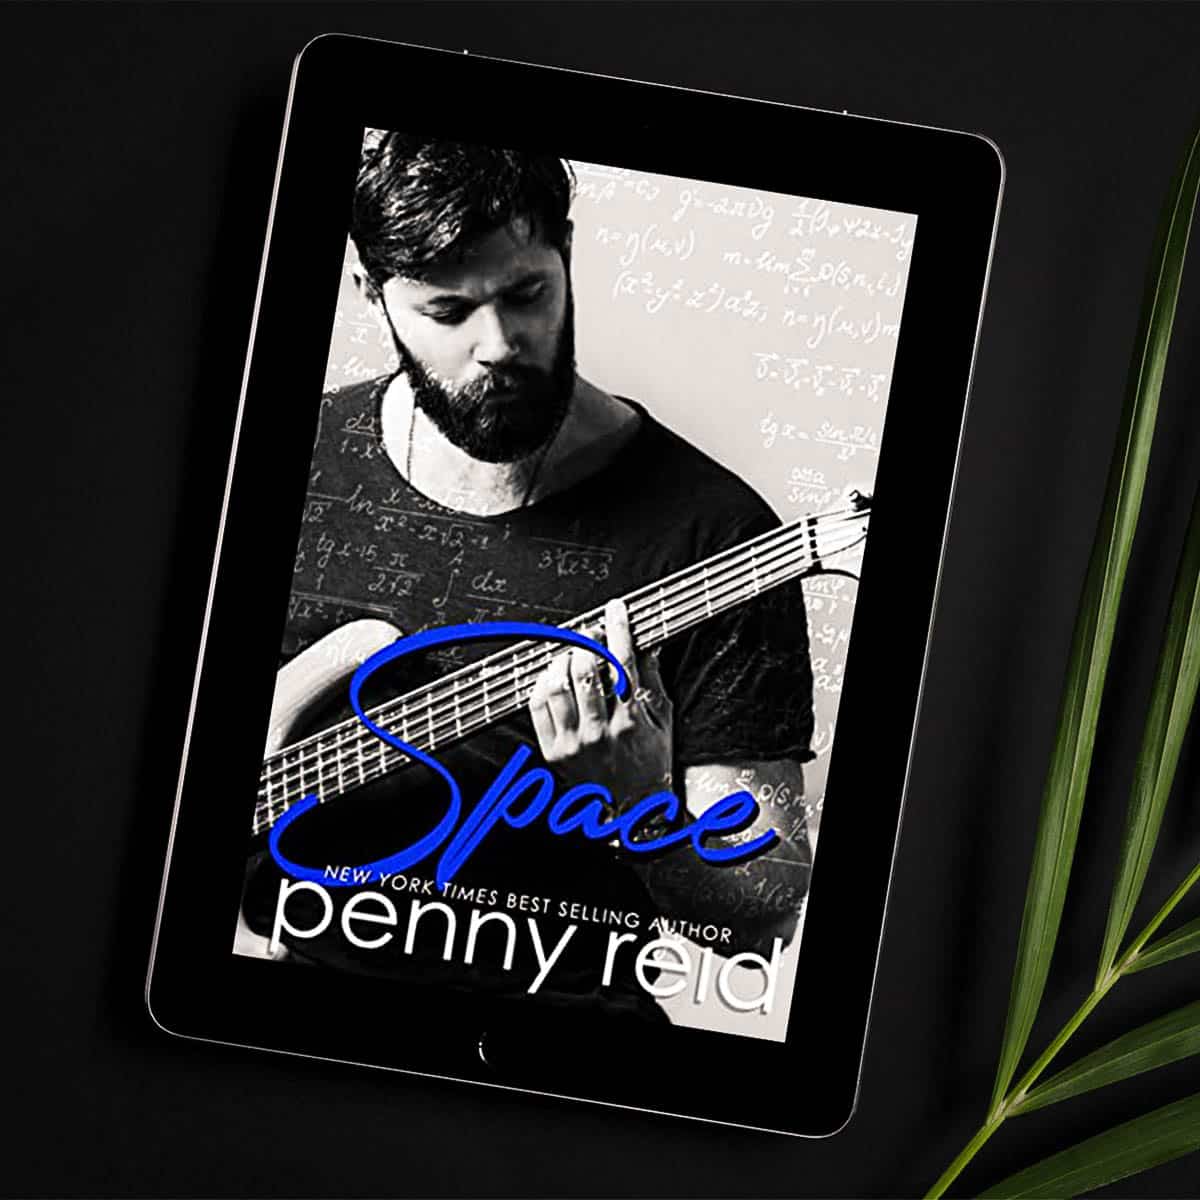 Space by Penny Reid is the 5th book in the Hypothesis series, featuring the continuing story of Mona and Abram. Penny Reid brings all the feelings, honest emotions, and slow burn to this series!